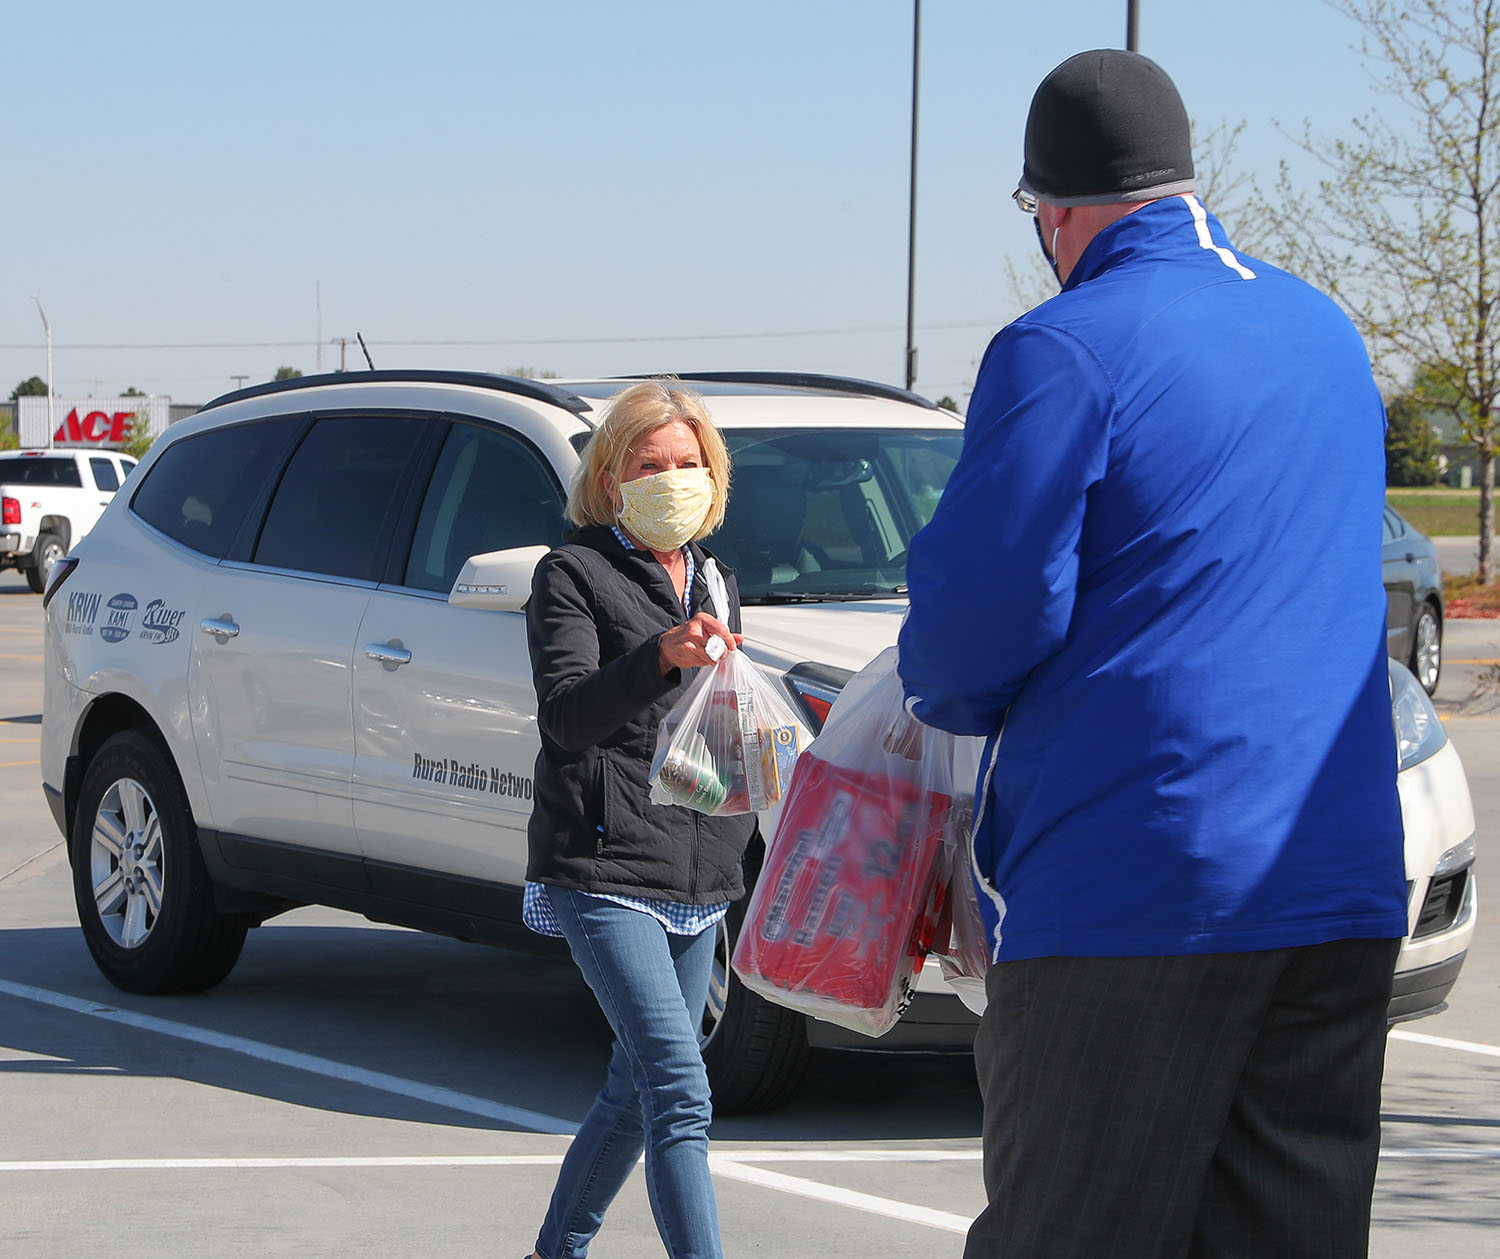 A community member brings her donation to Brandon Benitz of KRVN Radio during Friday’s “Lopers Love to Help” food drive at Hy-Vee in Kearney. Organized by UNK Athletics, the event supported the Big Blue Cupboard food pantry on campus.